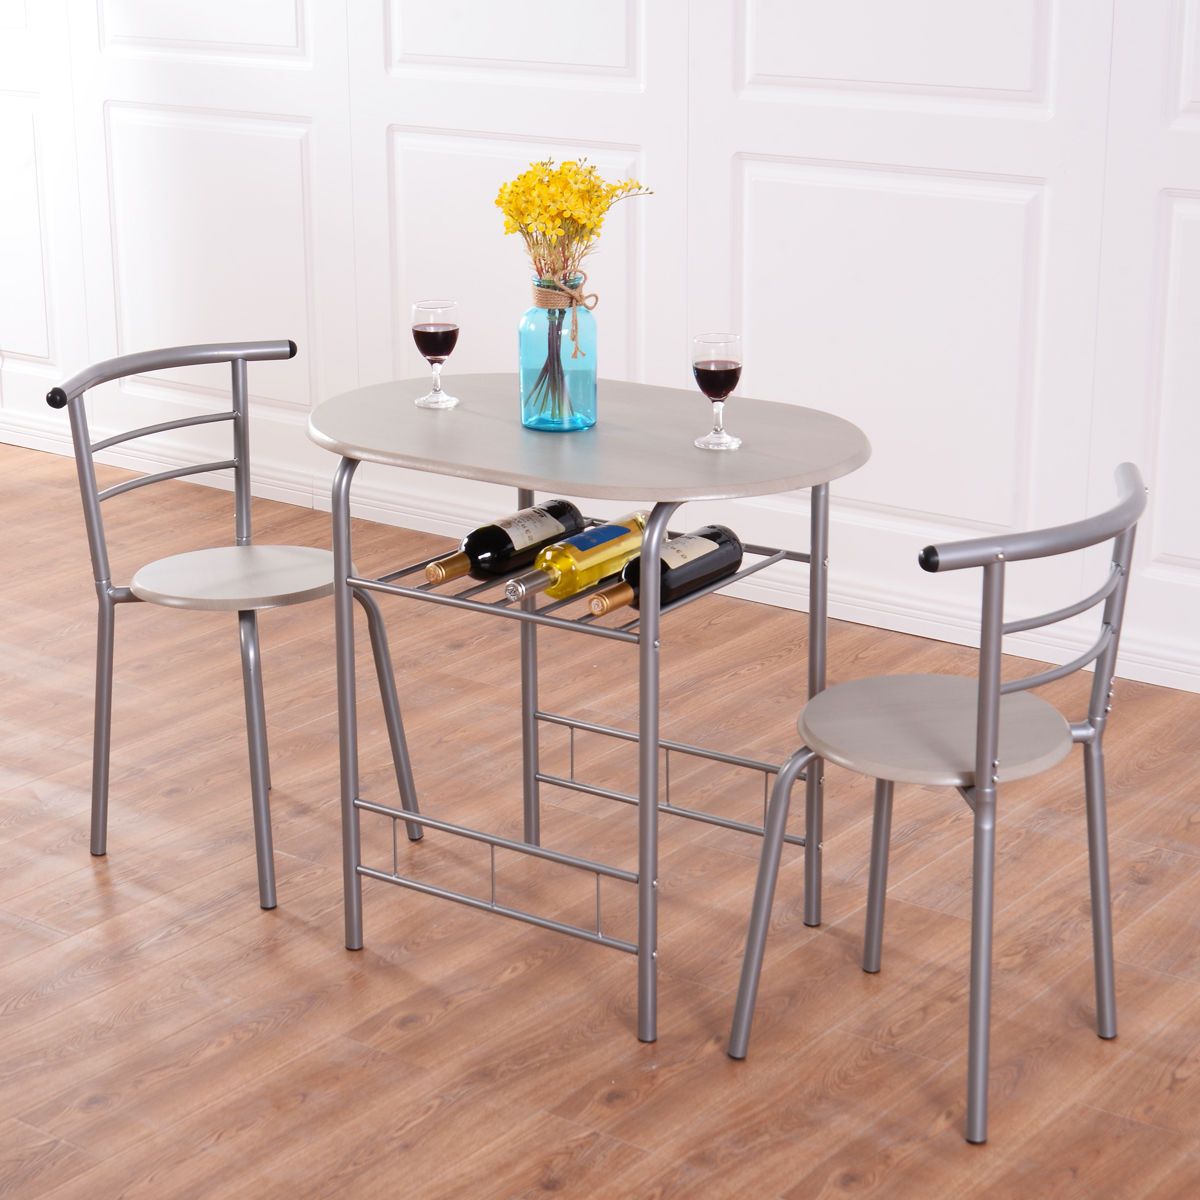 3 Piece Bistro Dining Sets With Most Current Costway 3 Piece Dining Set Table 2 Chairs Bistro Pub Home Kitchen (View 5 of 15)